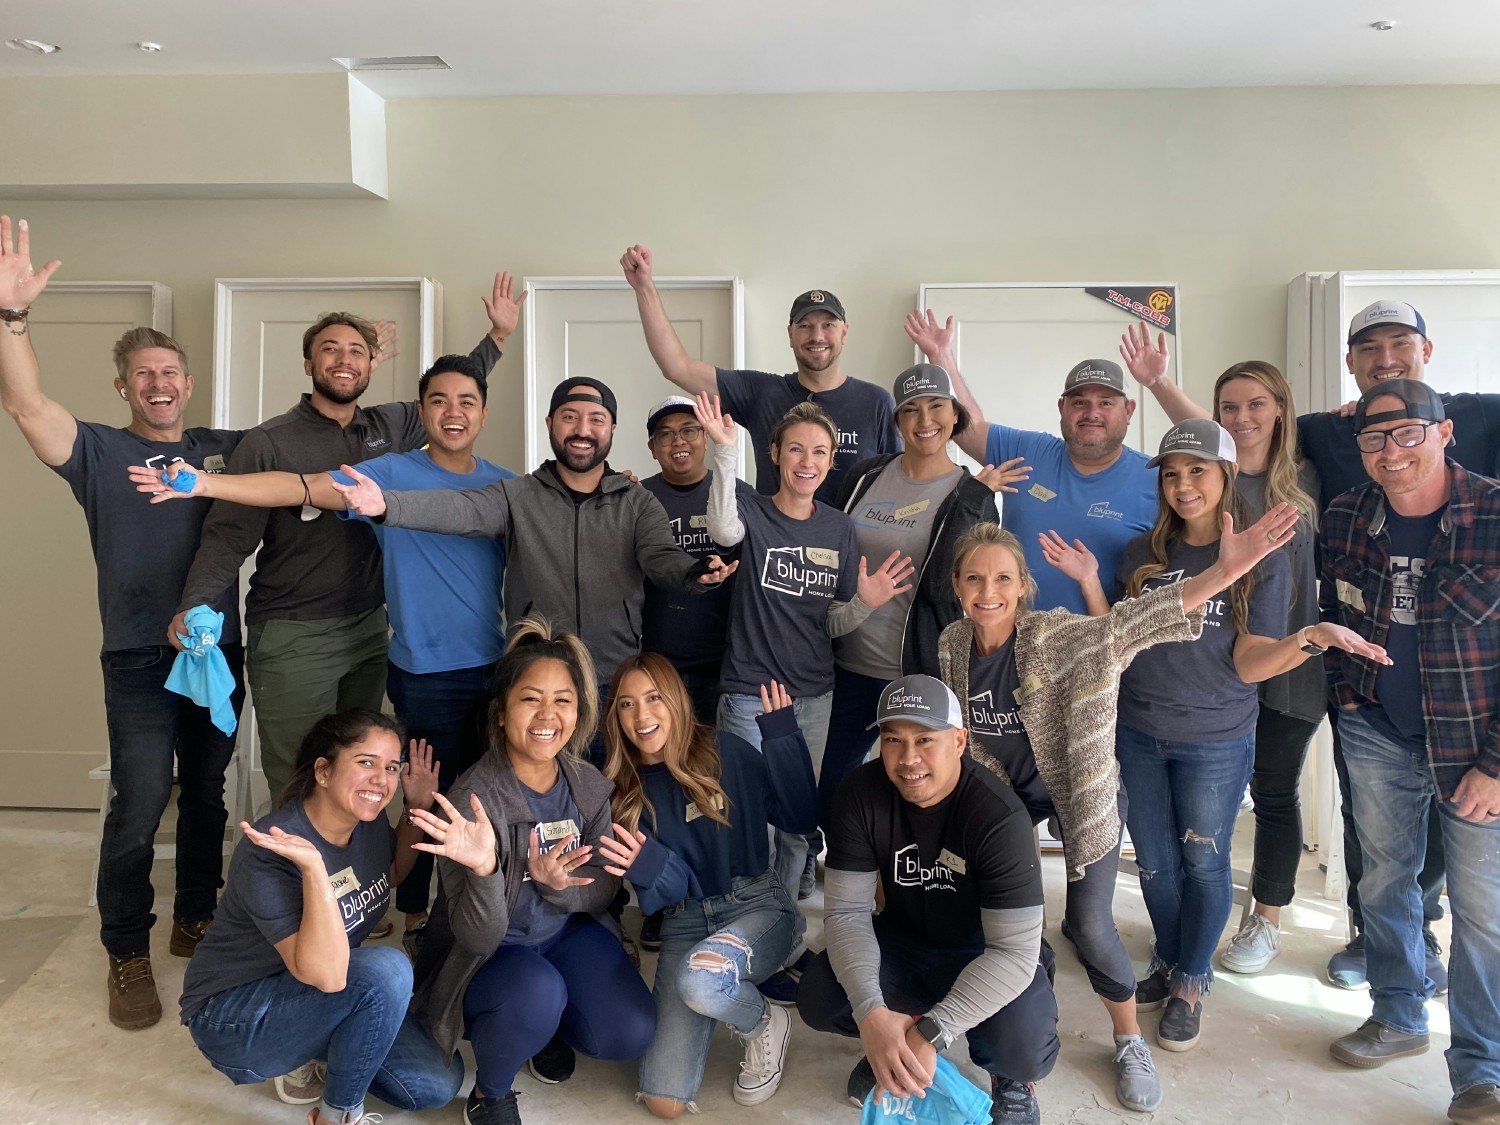 The BluPrint Home Loans volunteering together in San Diego, California for Habitat for Humanity.